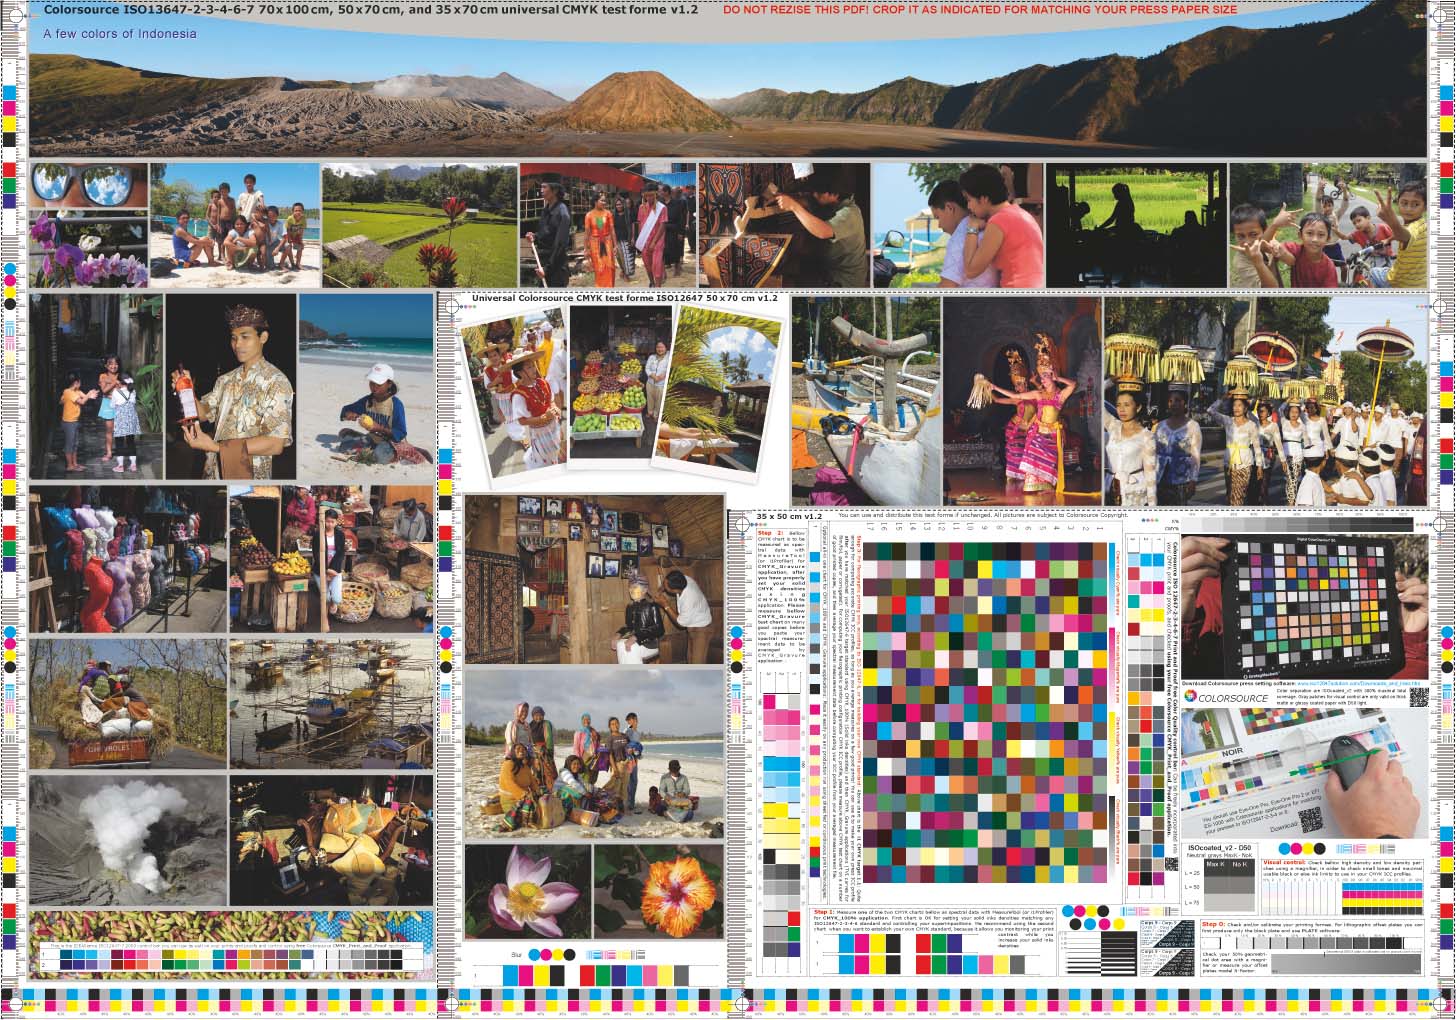 The base 50 x 35 cm CMYK print test includes all the CMYK test charts you need for matching easily ISO 2 3 4 5 6 CMYK print standards